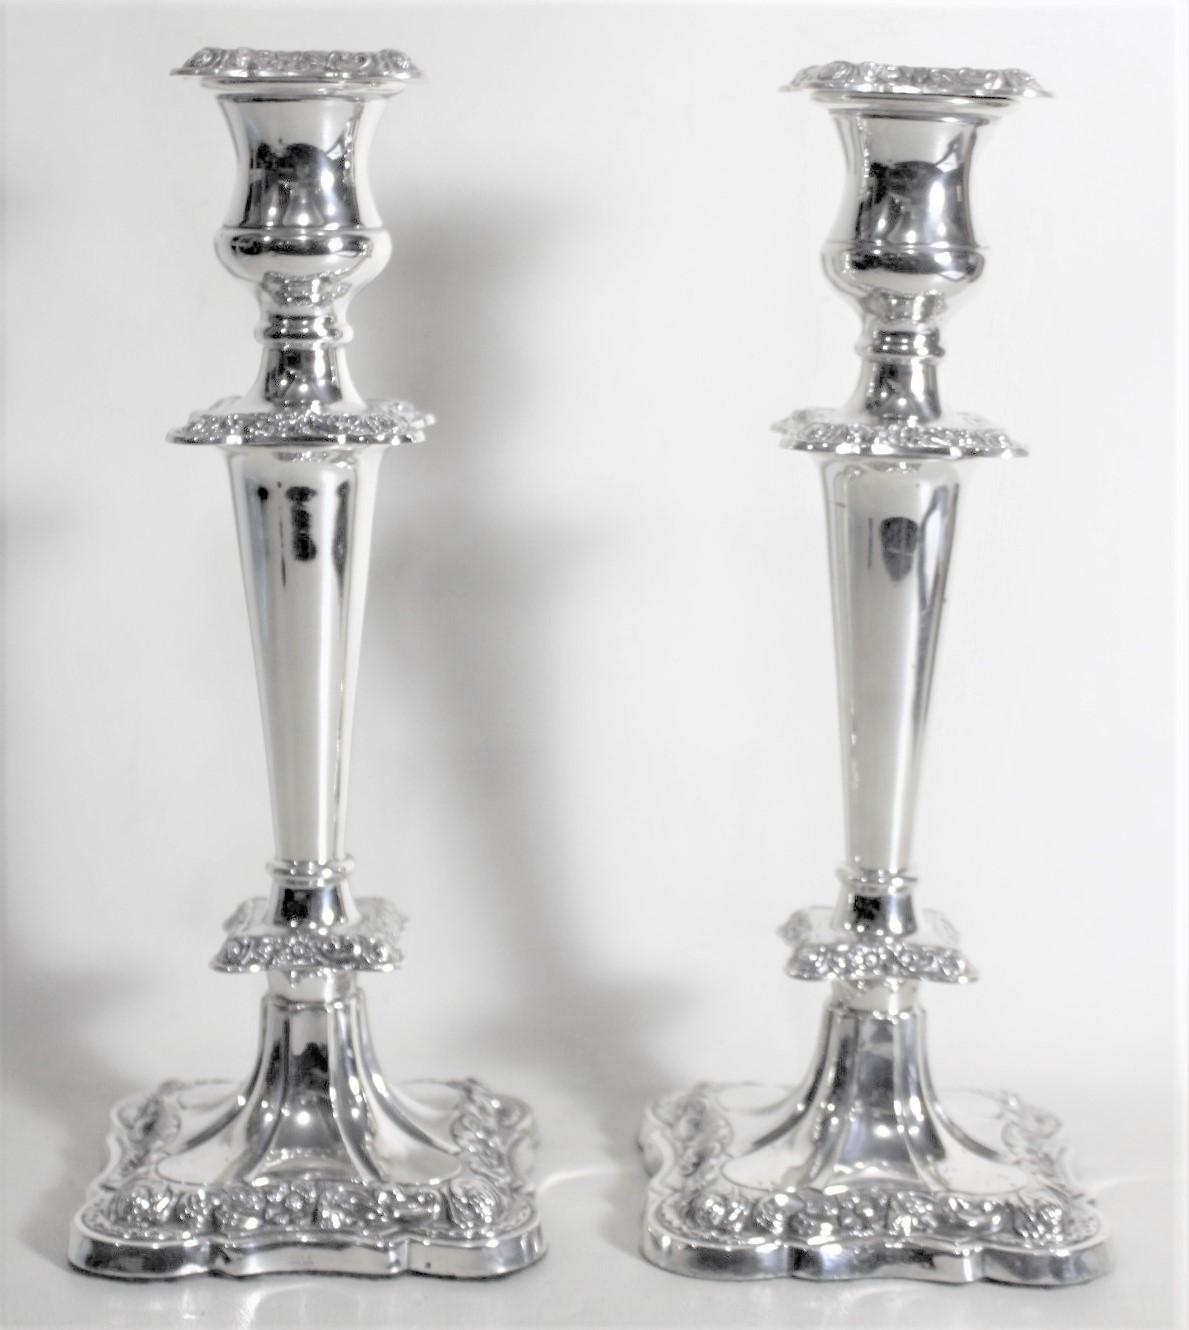 Molded Pair of English Sterling Silver Candlesticks with Chased Floral Decoration